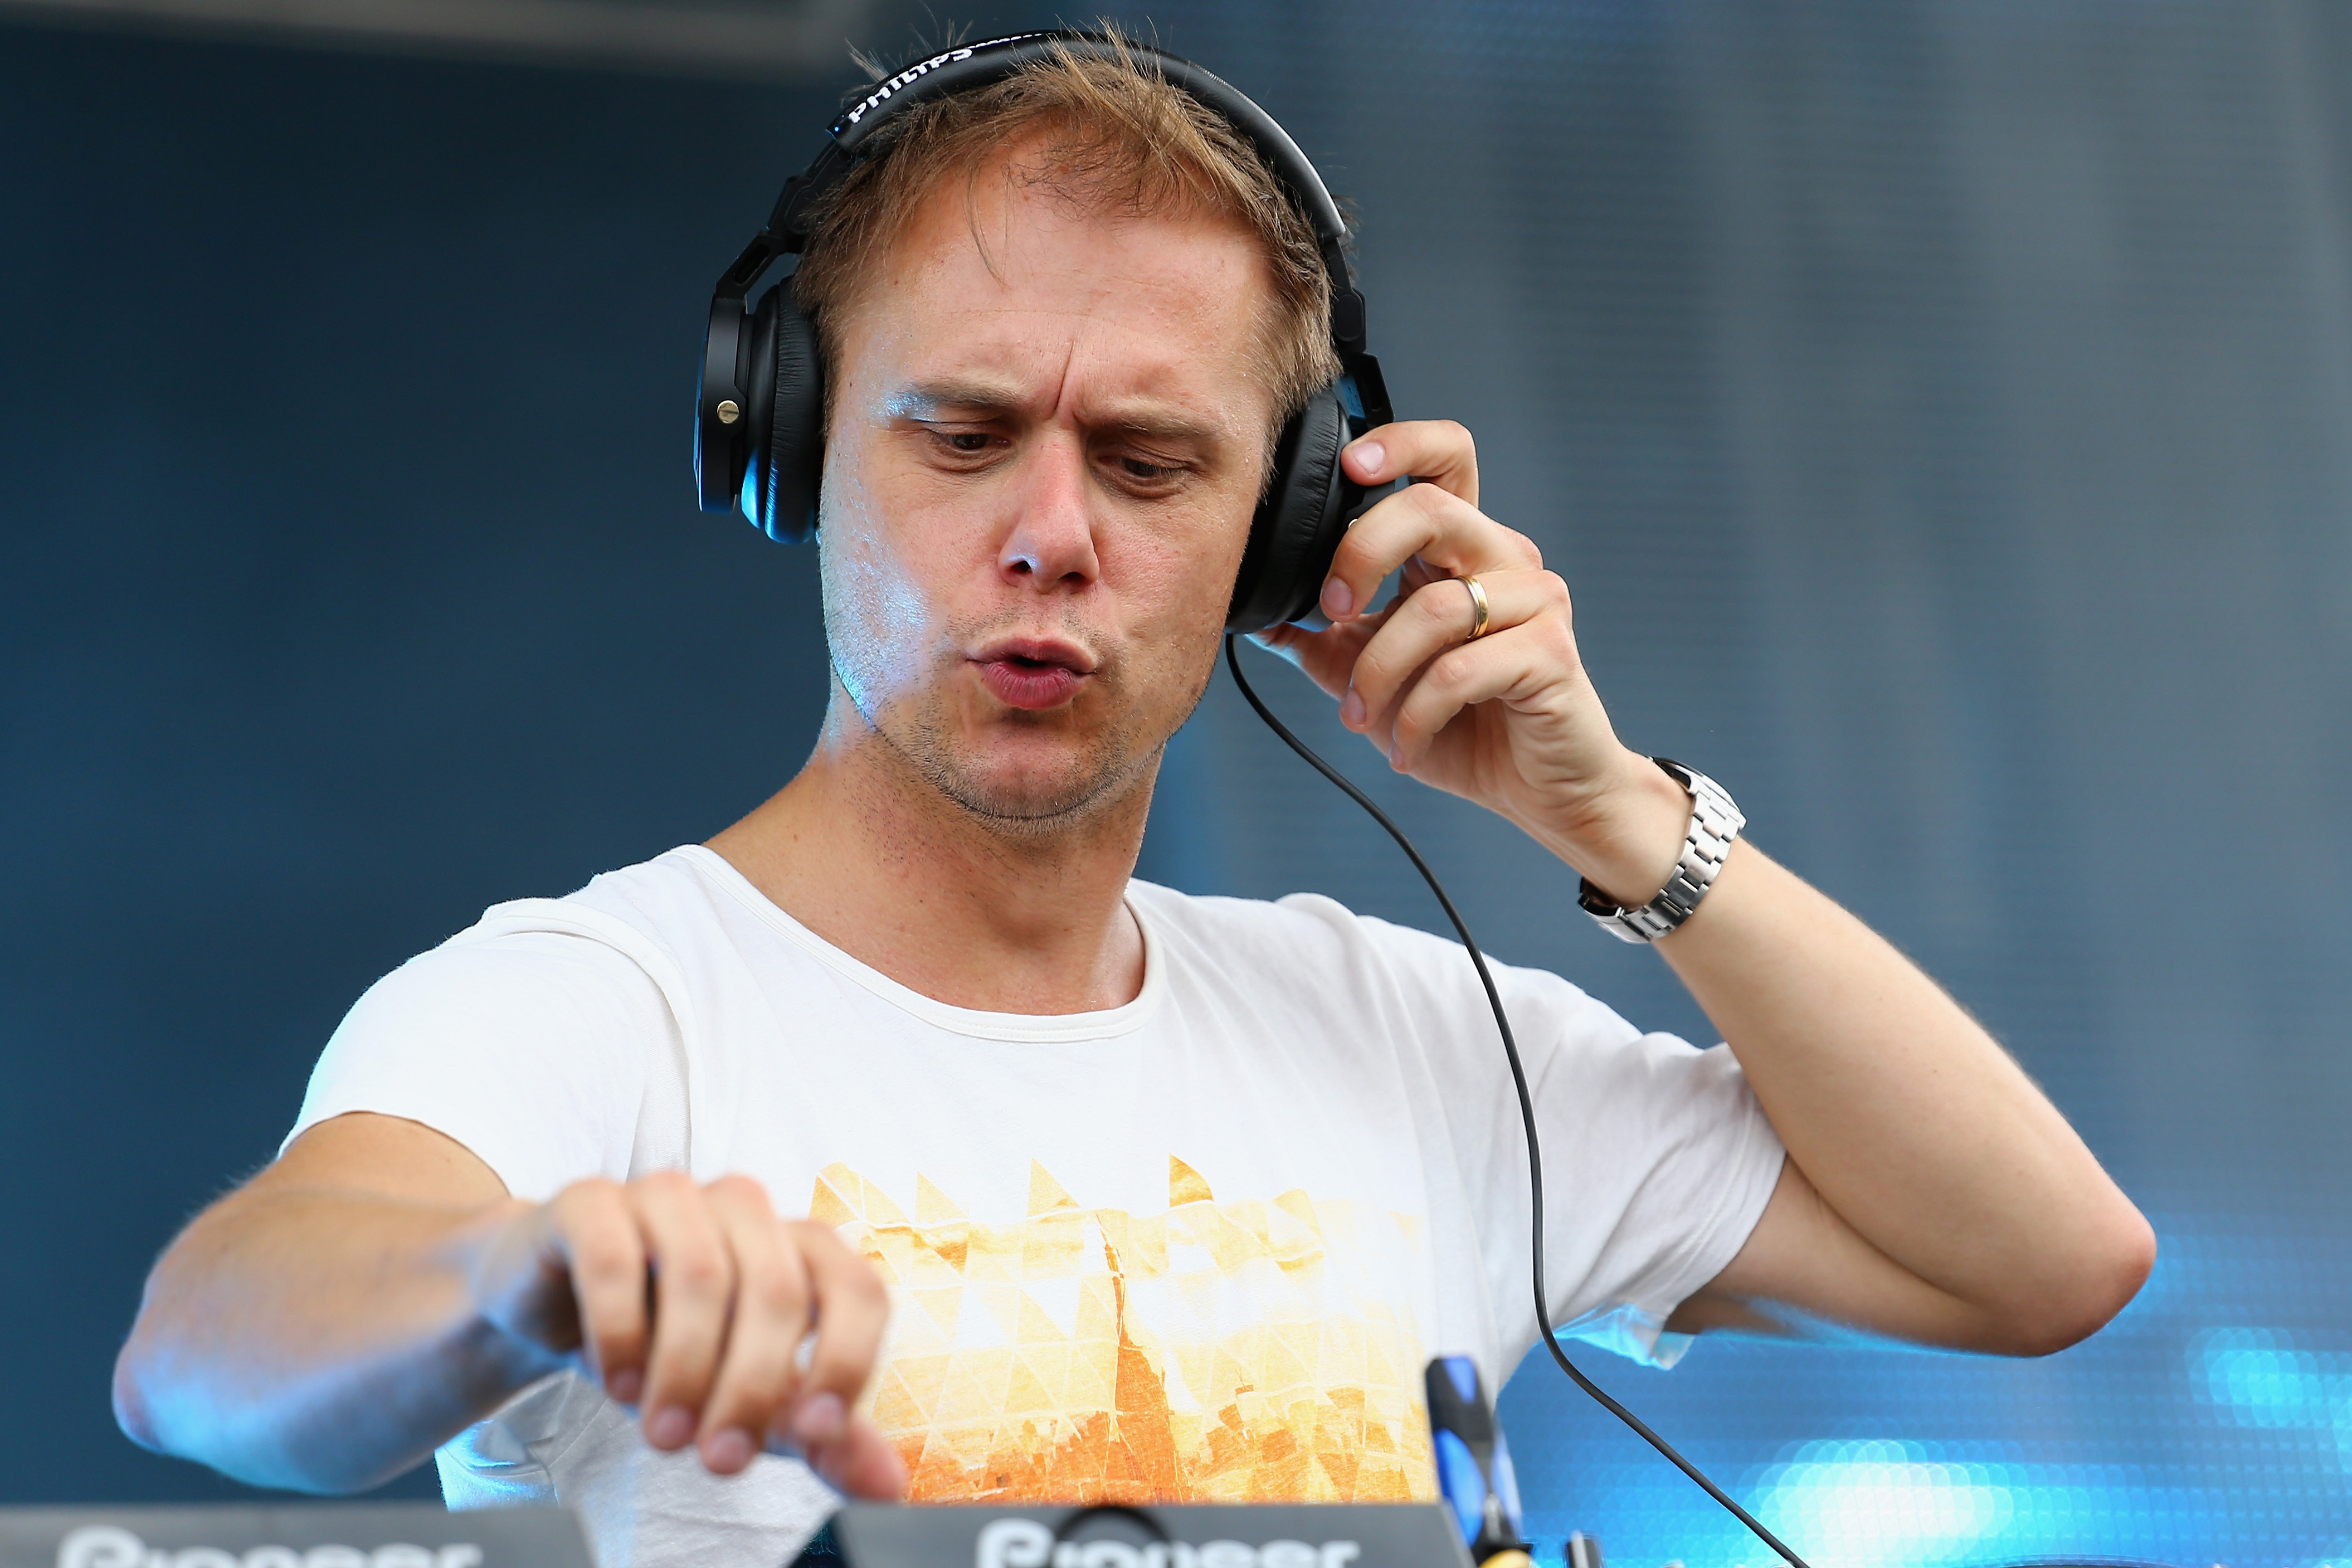 Armin van Buuren performs in the infield prior to the 140th running of the Preakness Stakes at Pimlico Race Course on May 16, 2015 in Baltimore. (Maddie Meyer—Getty Images)